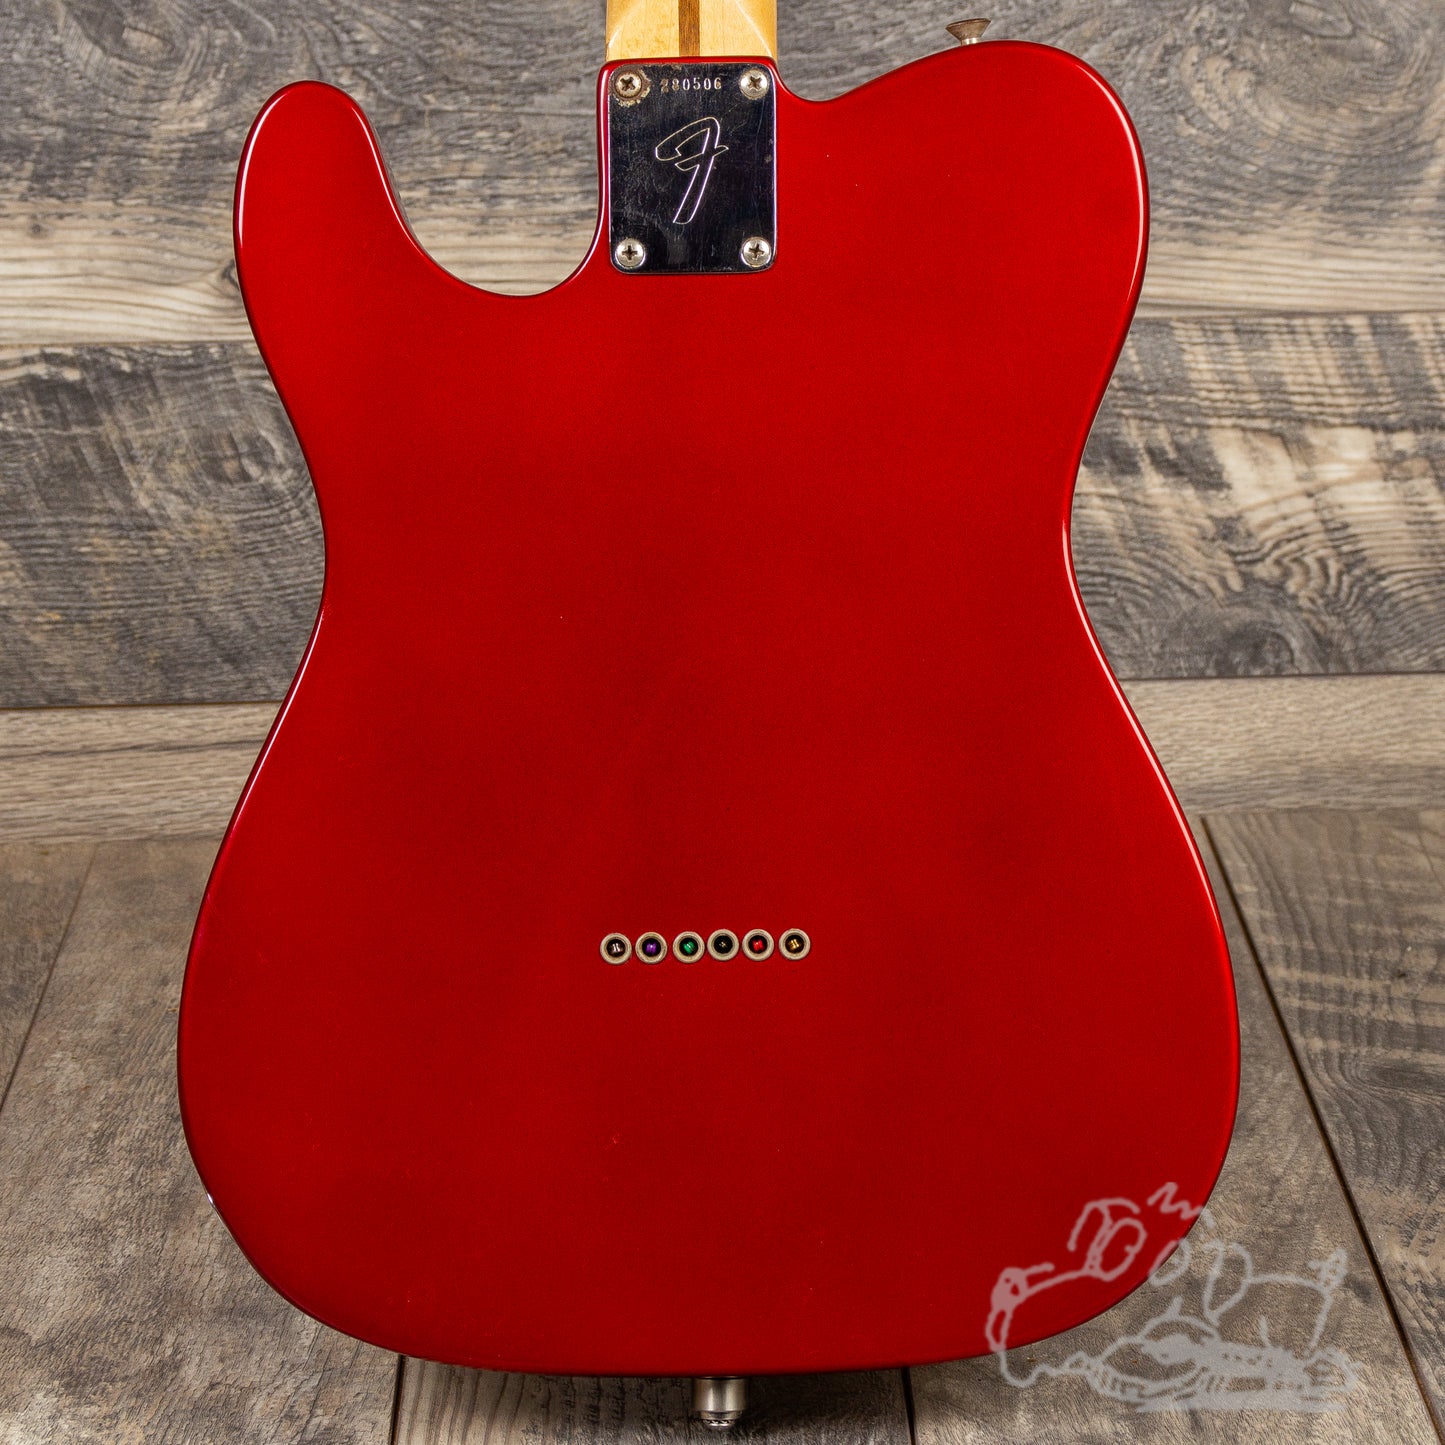 1971 Fender Telecaster Candy Apple Red